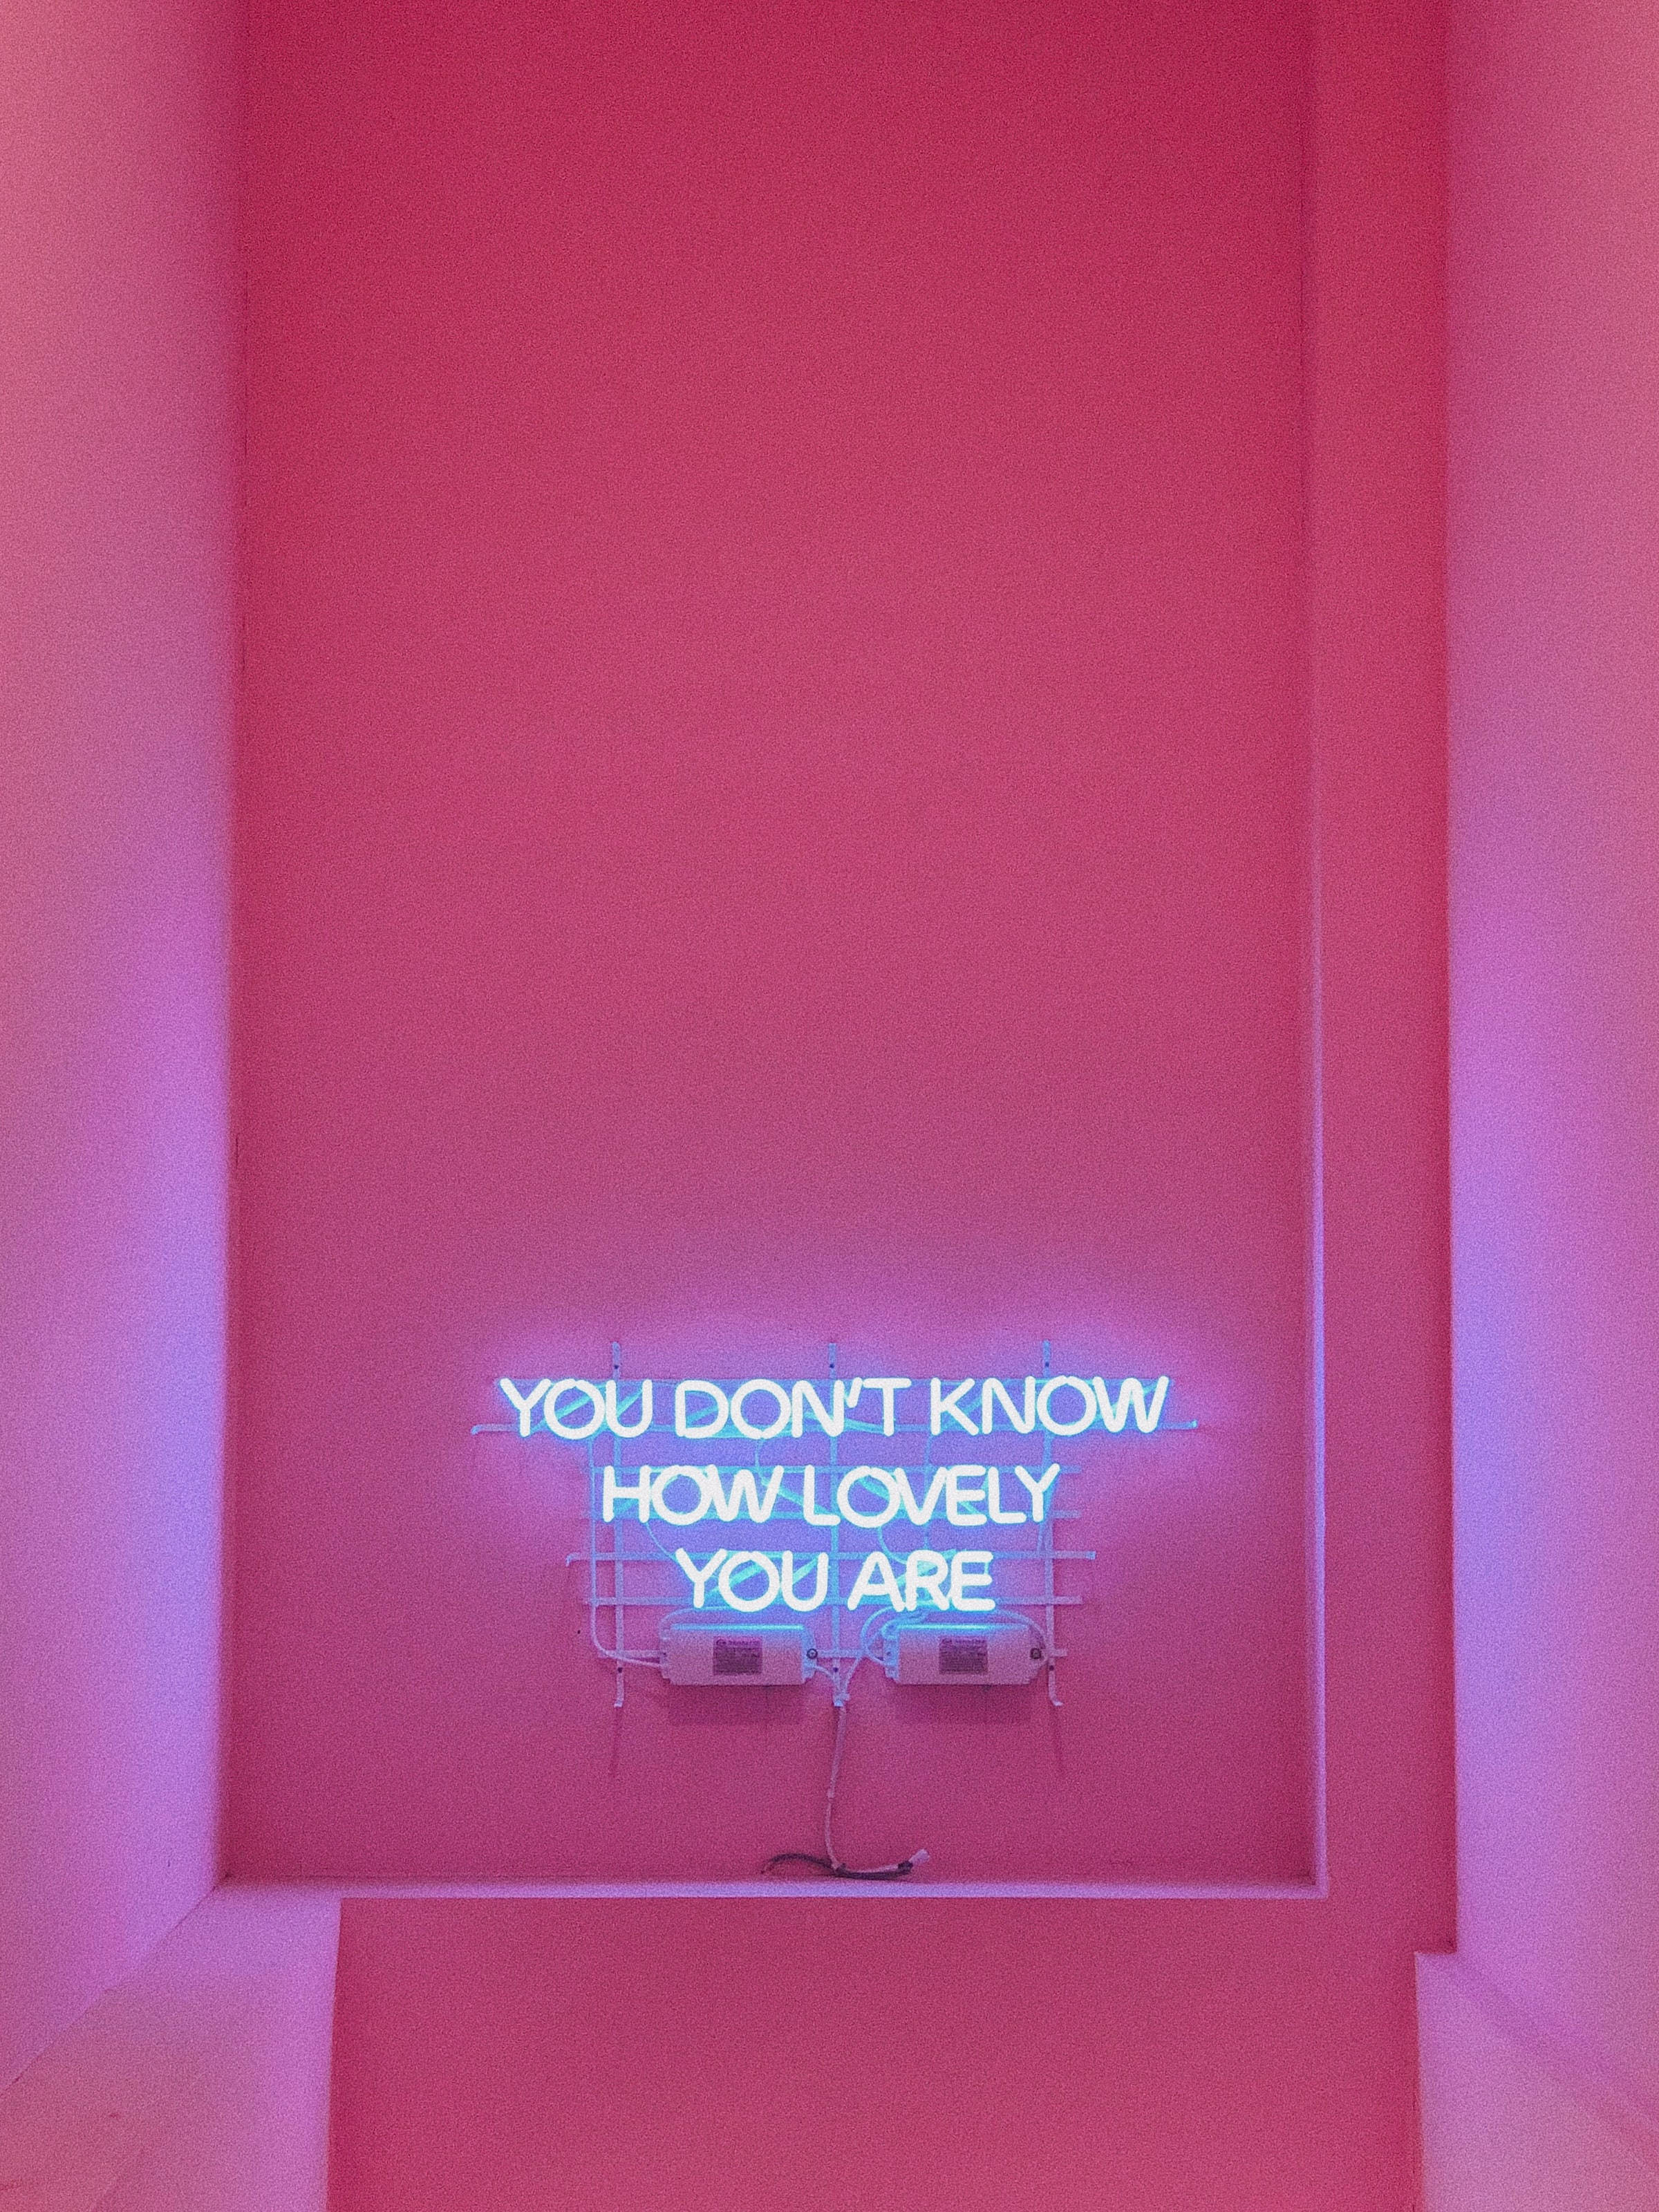 Cute Pink Aesthetic How Lovely Quote